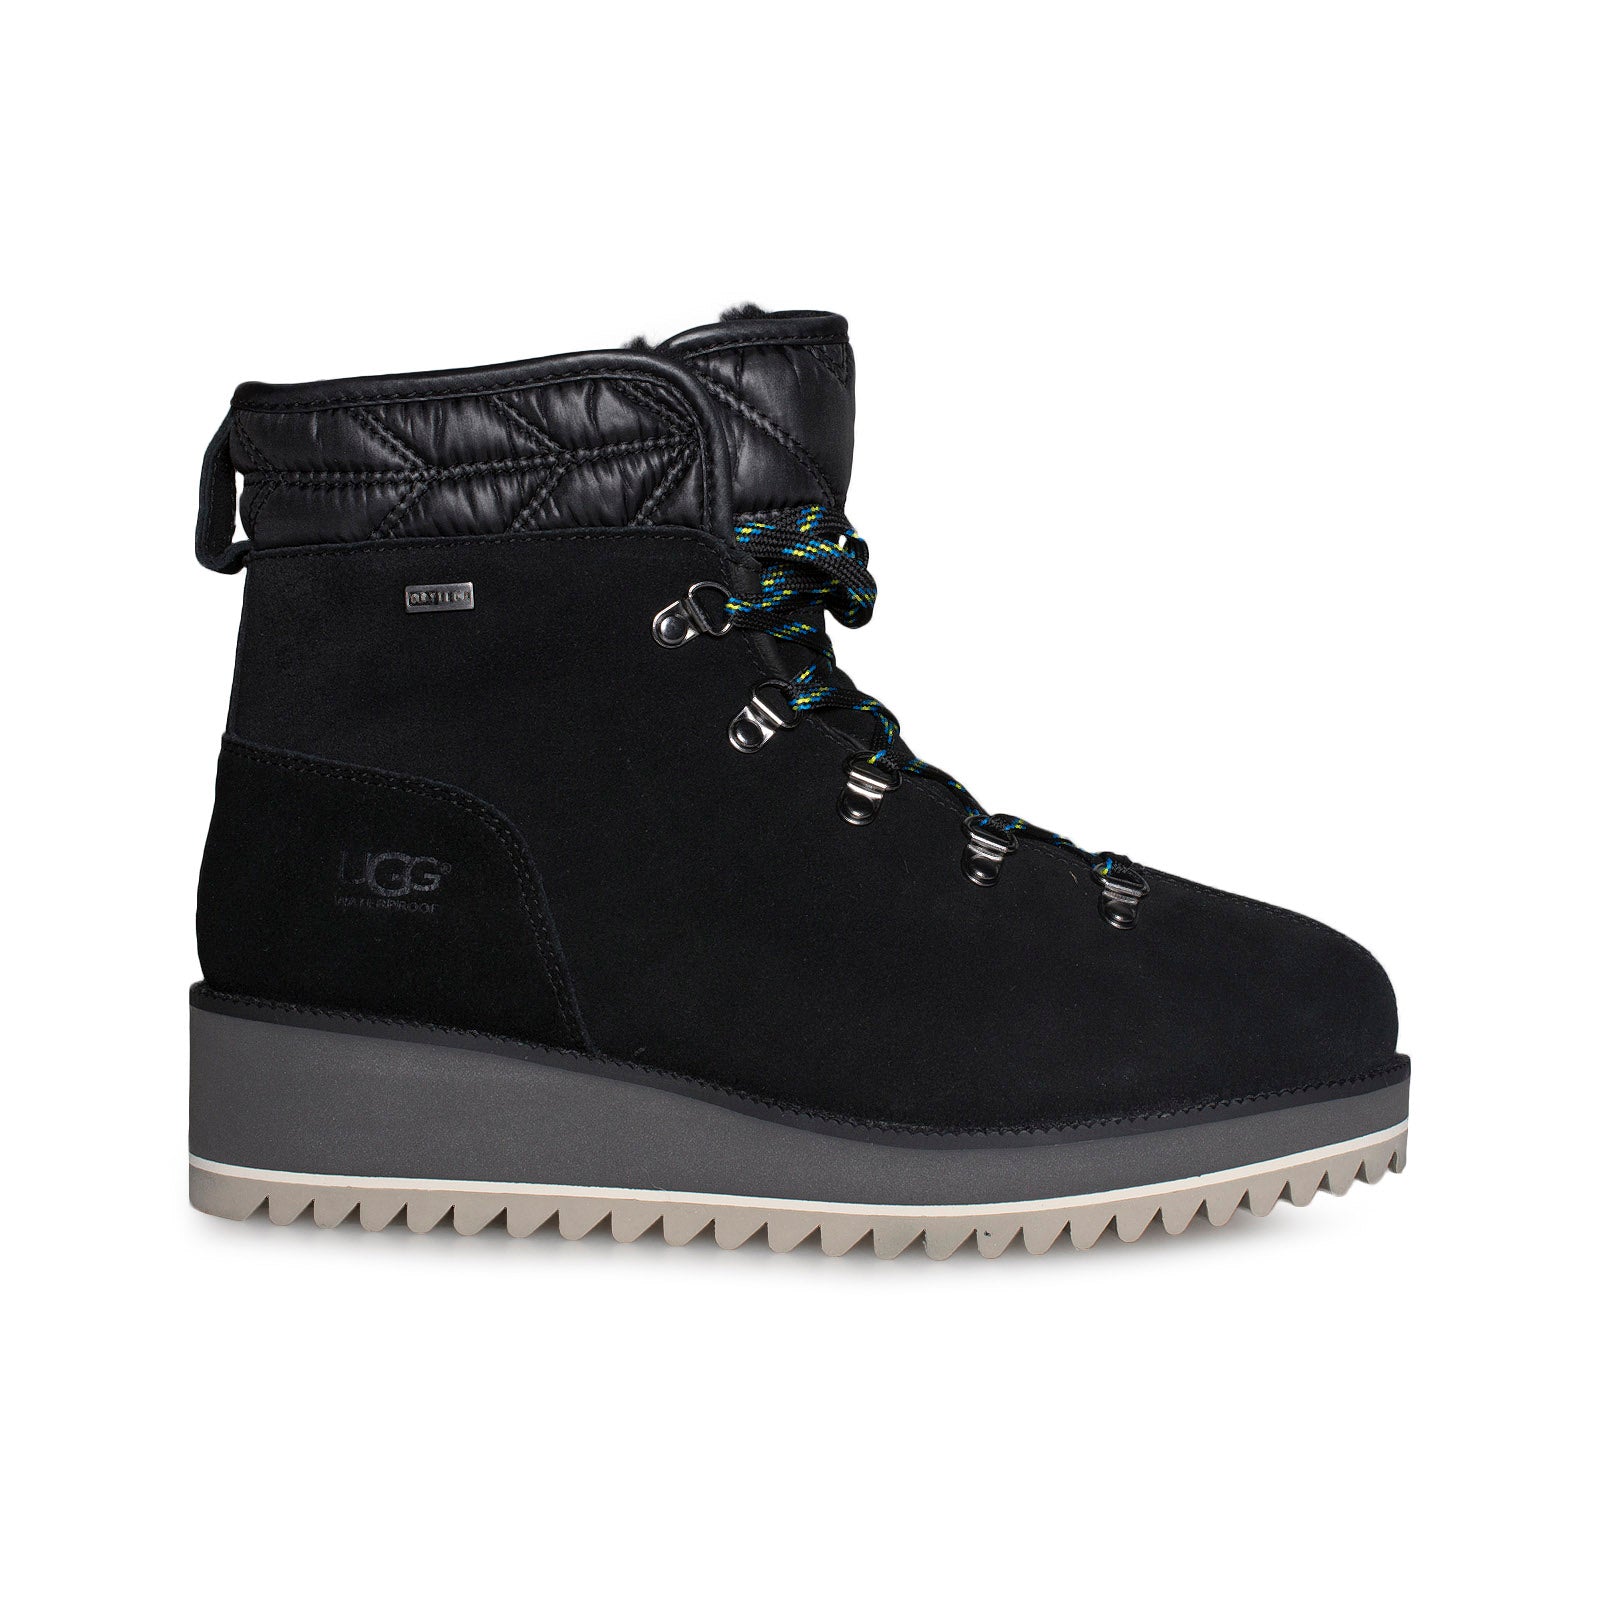 UGG Birch Lace-Up Black Boot - Women's - MyCozyBoots